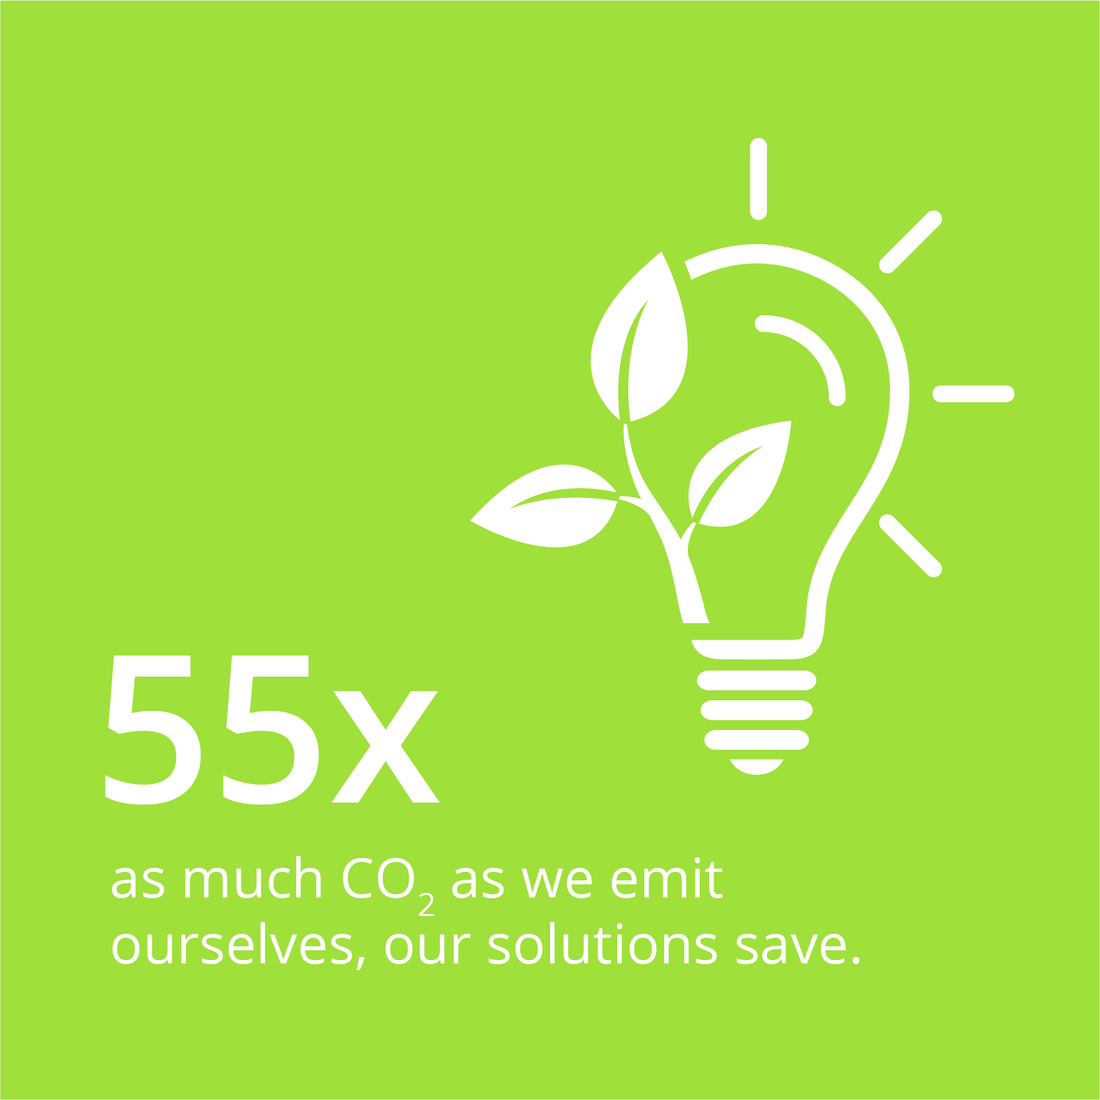 Sustainability: Solutions